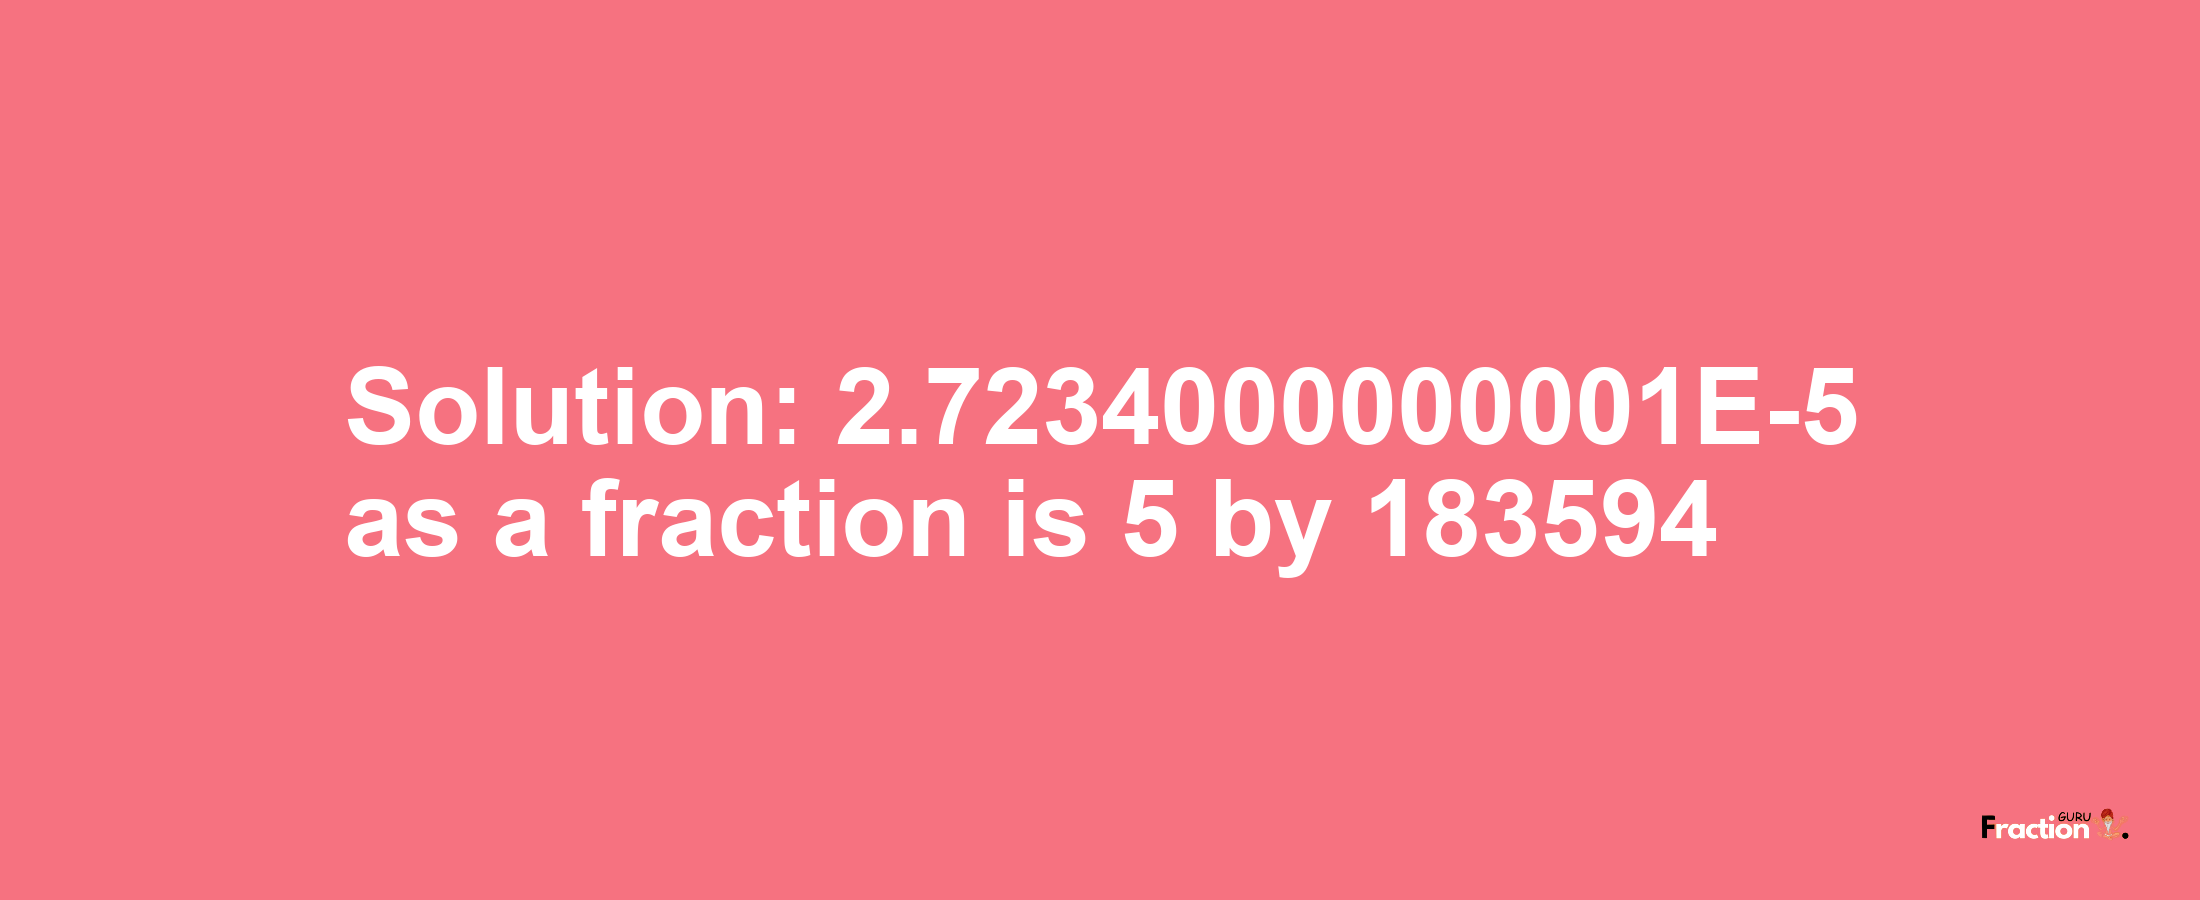 Solution:2.7234000000001E-5 as a fraction is 5/183594